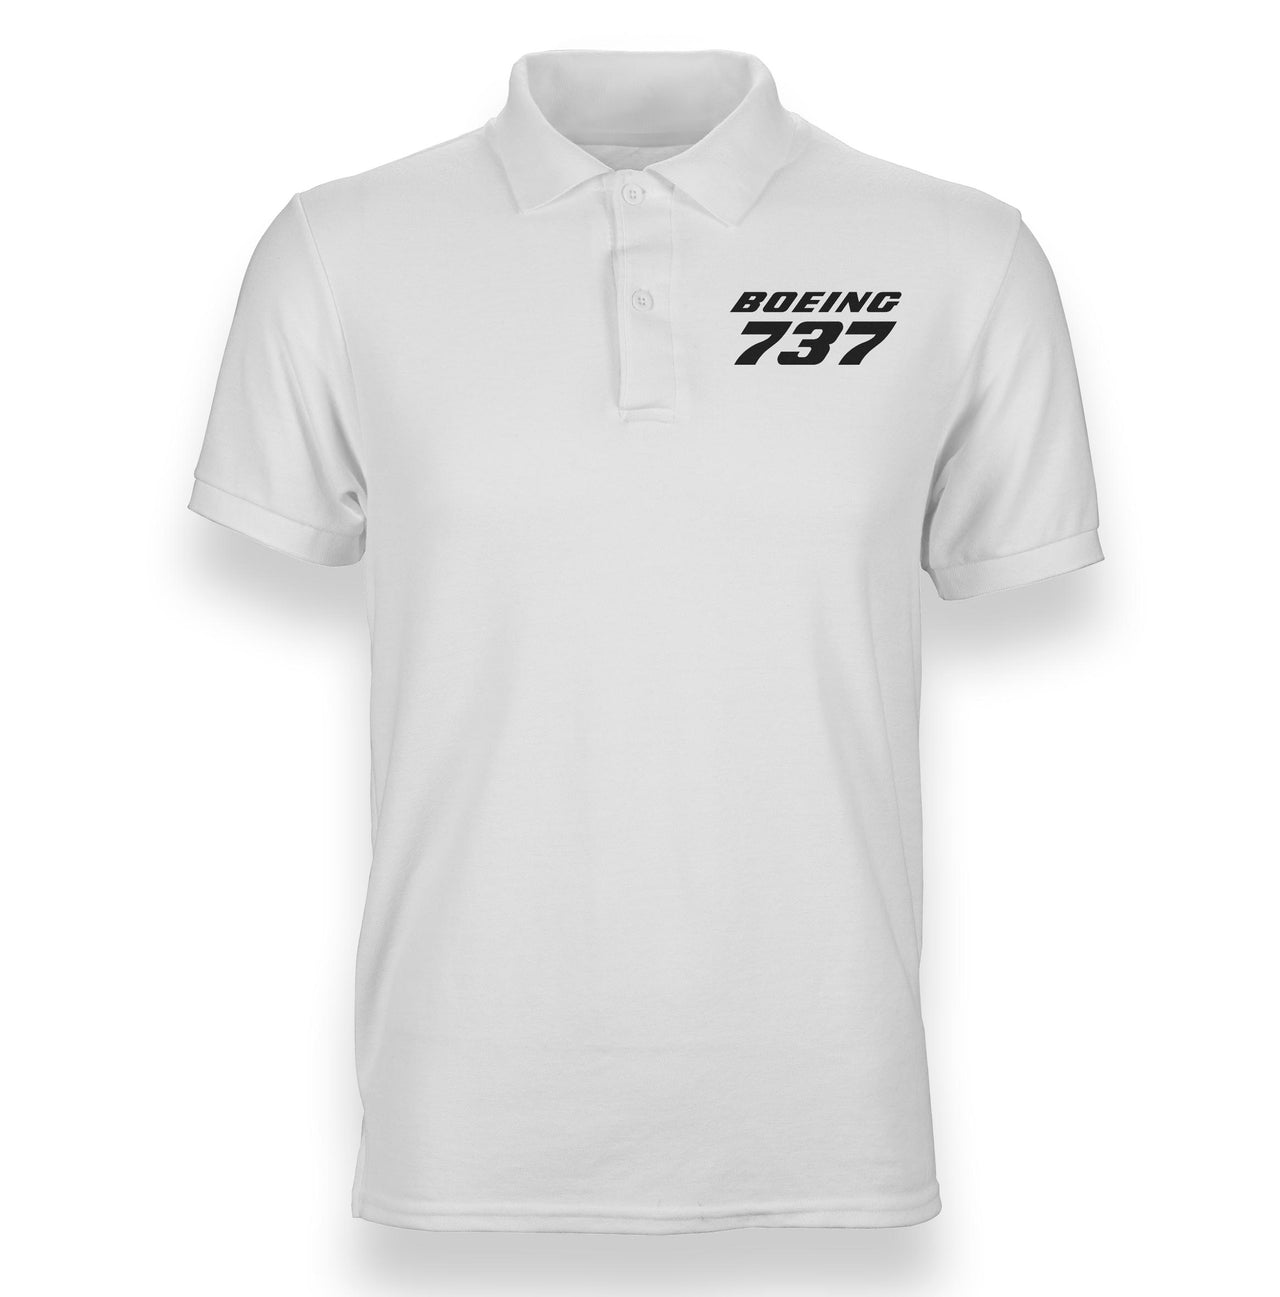 Boeing 737 & Text Designed Polo T-Shirts